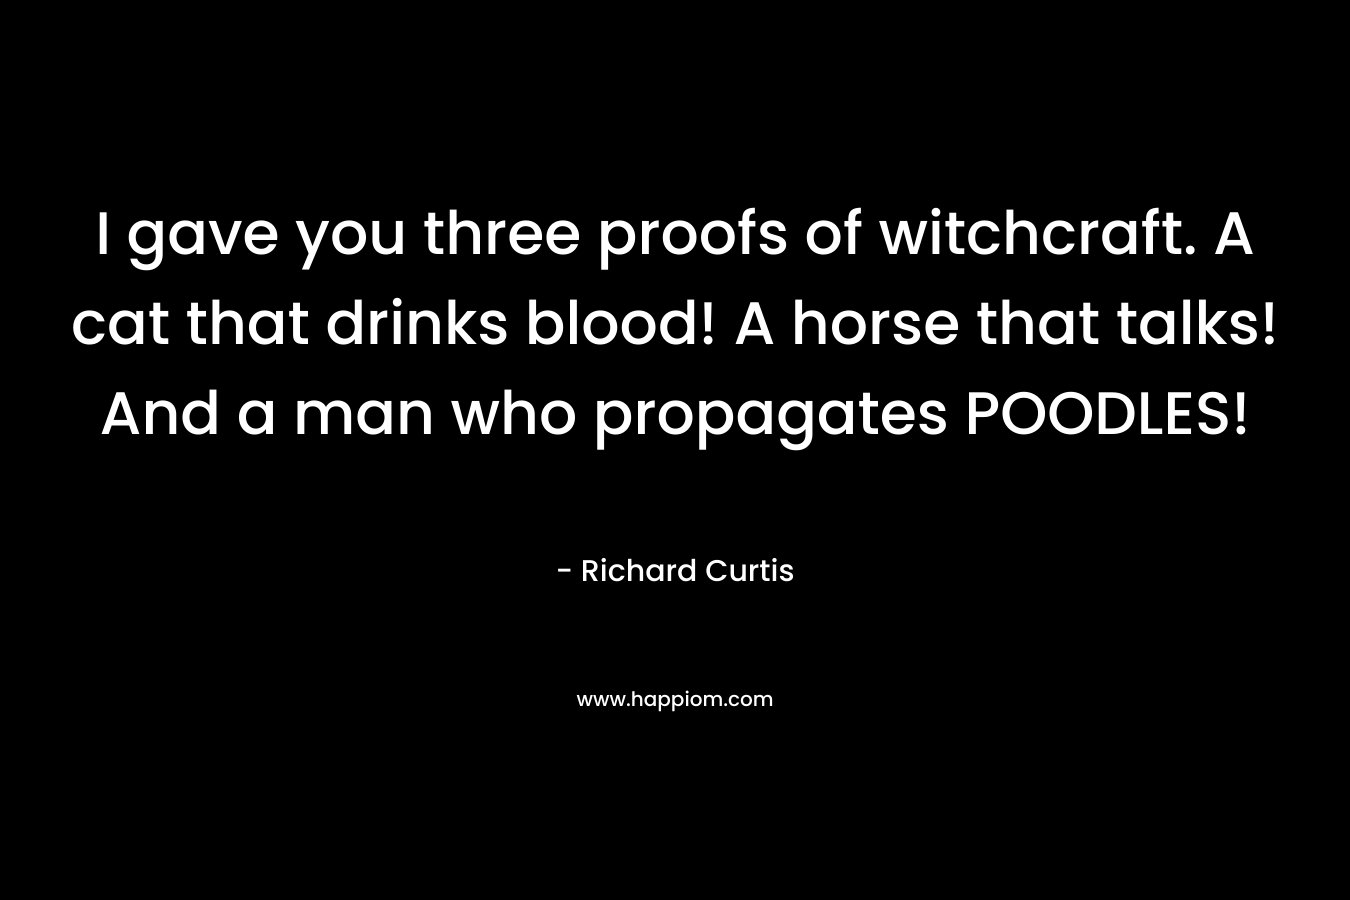 I gave you three proofs of witchcraft. A cat that drinks blood! A horse that talks! And a man who propagates POODLES! – Richard Curtis